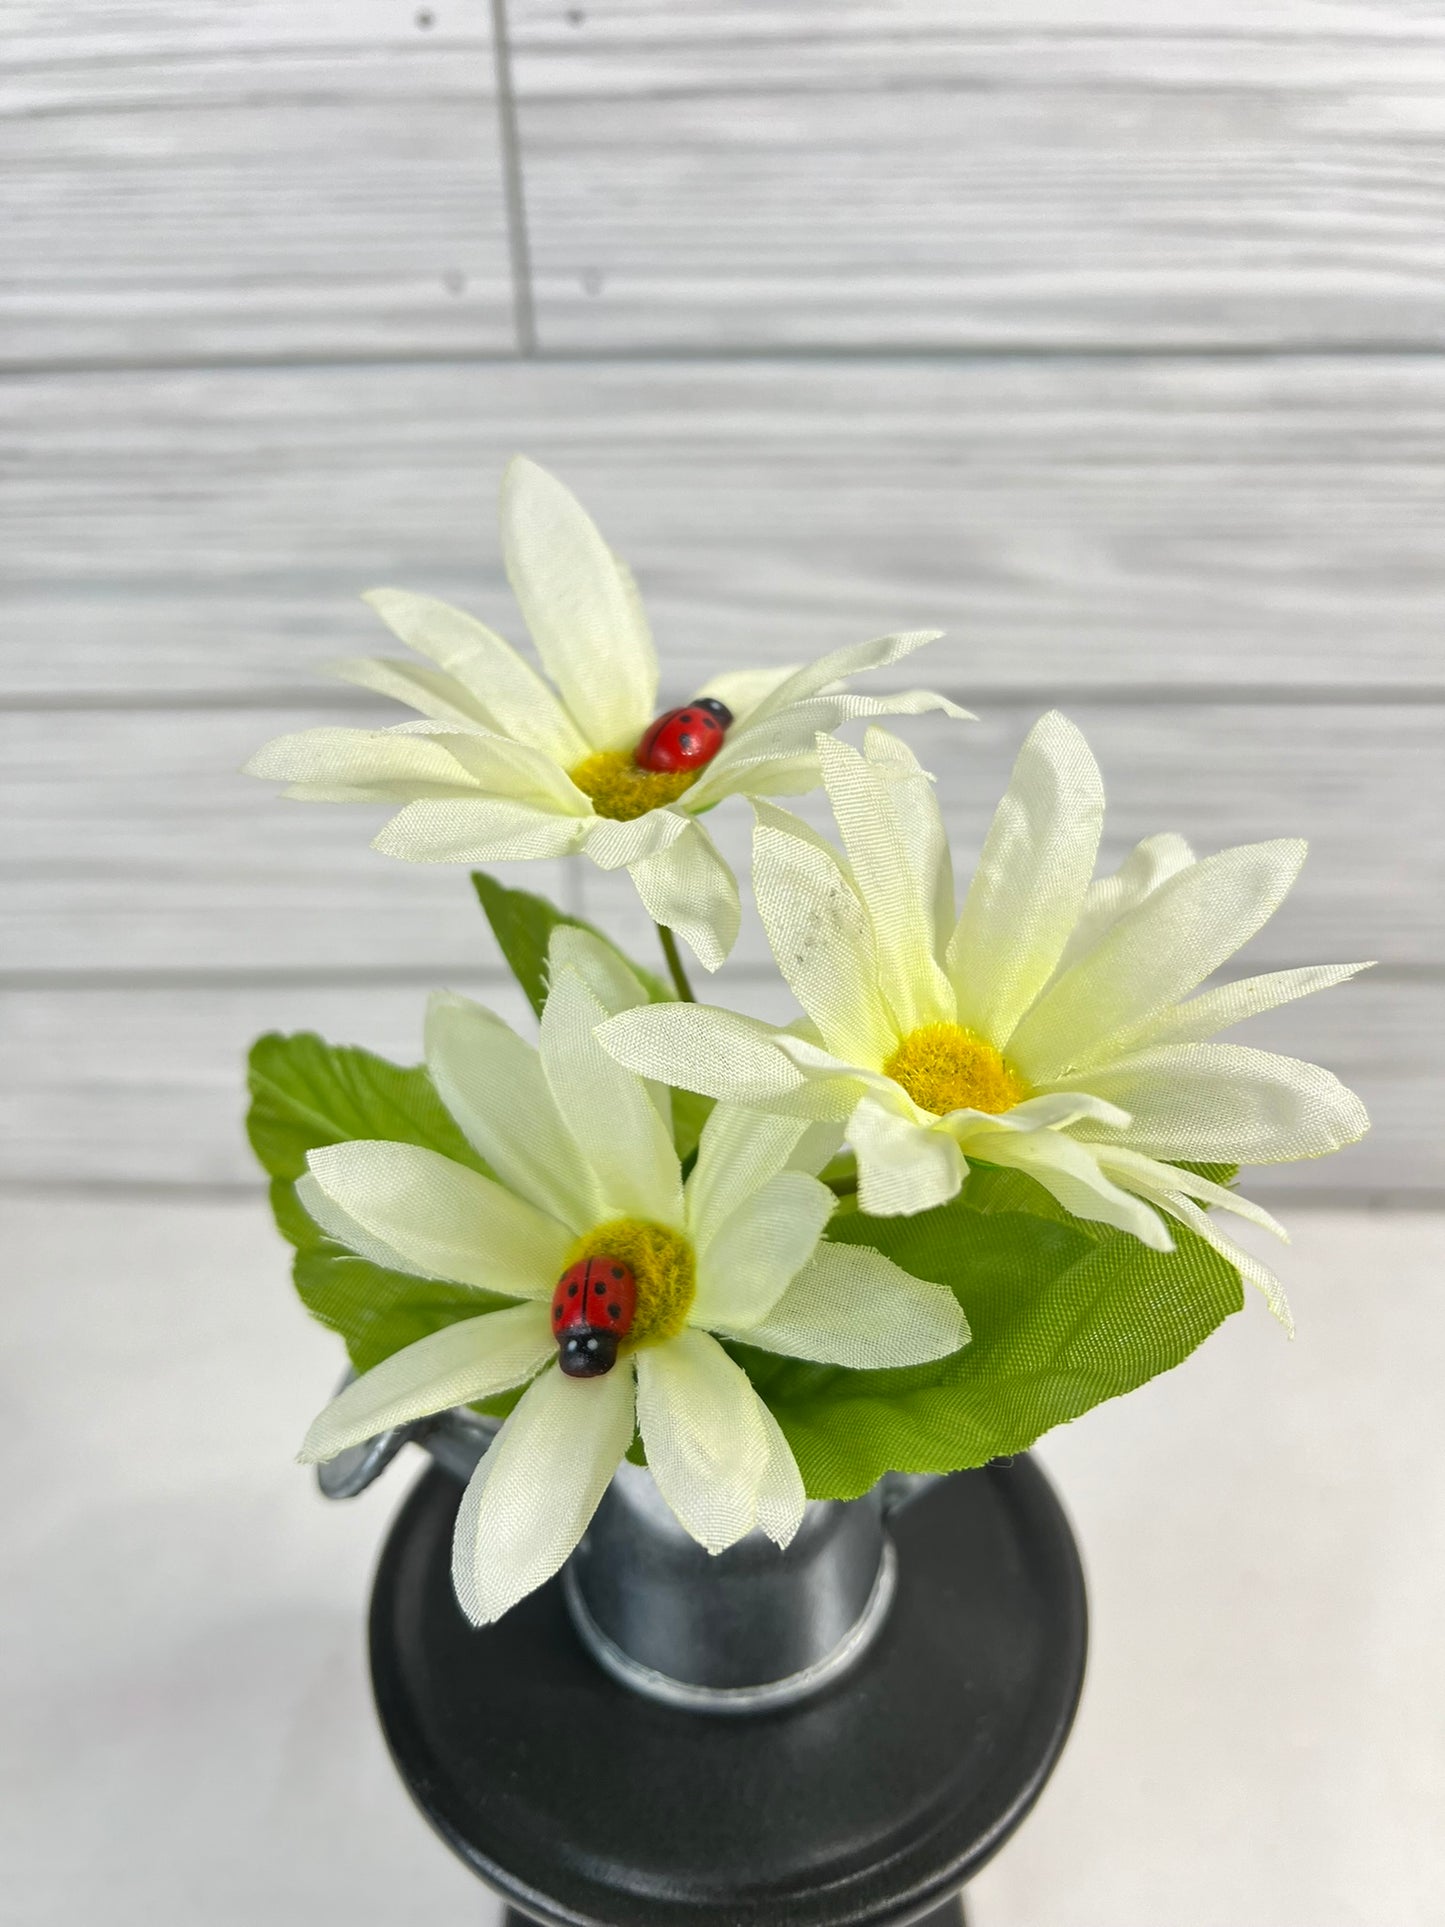 Ladybug and Daisy Mini Metal Watering Can